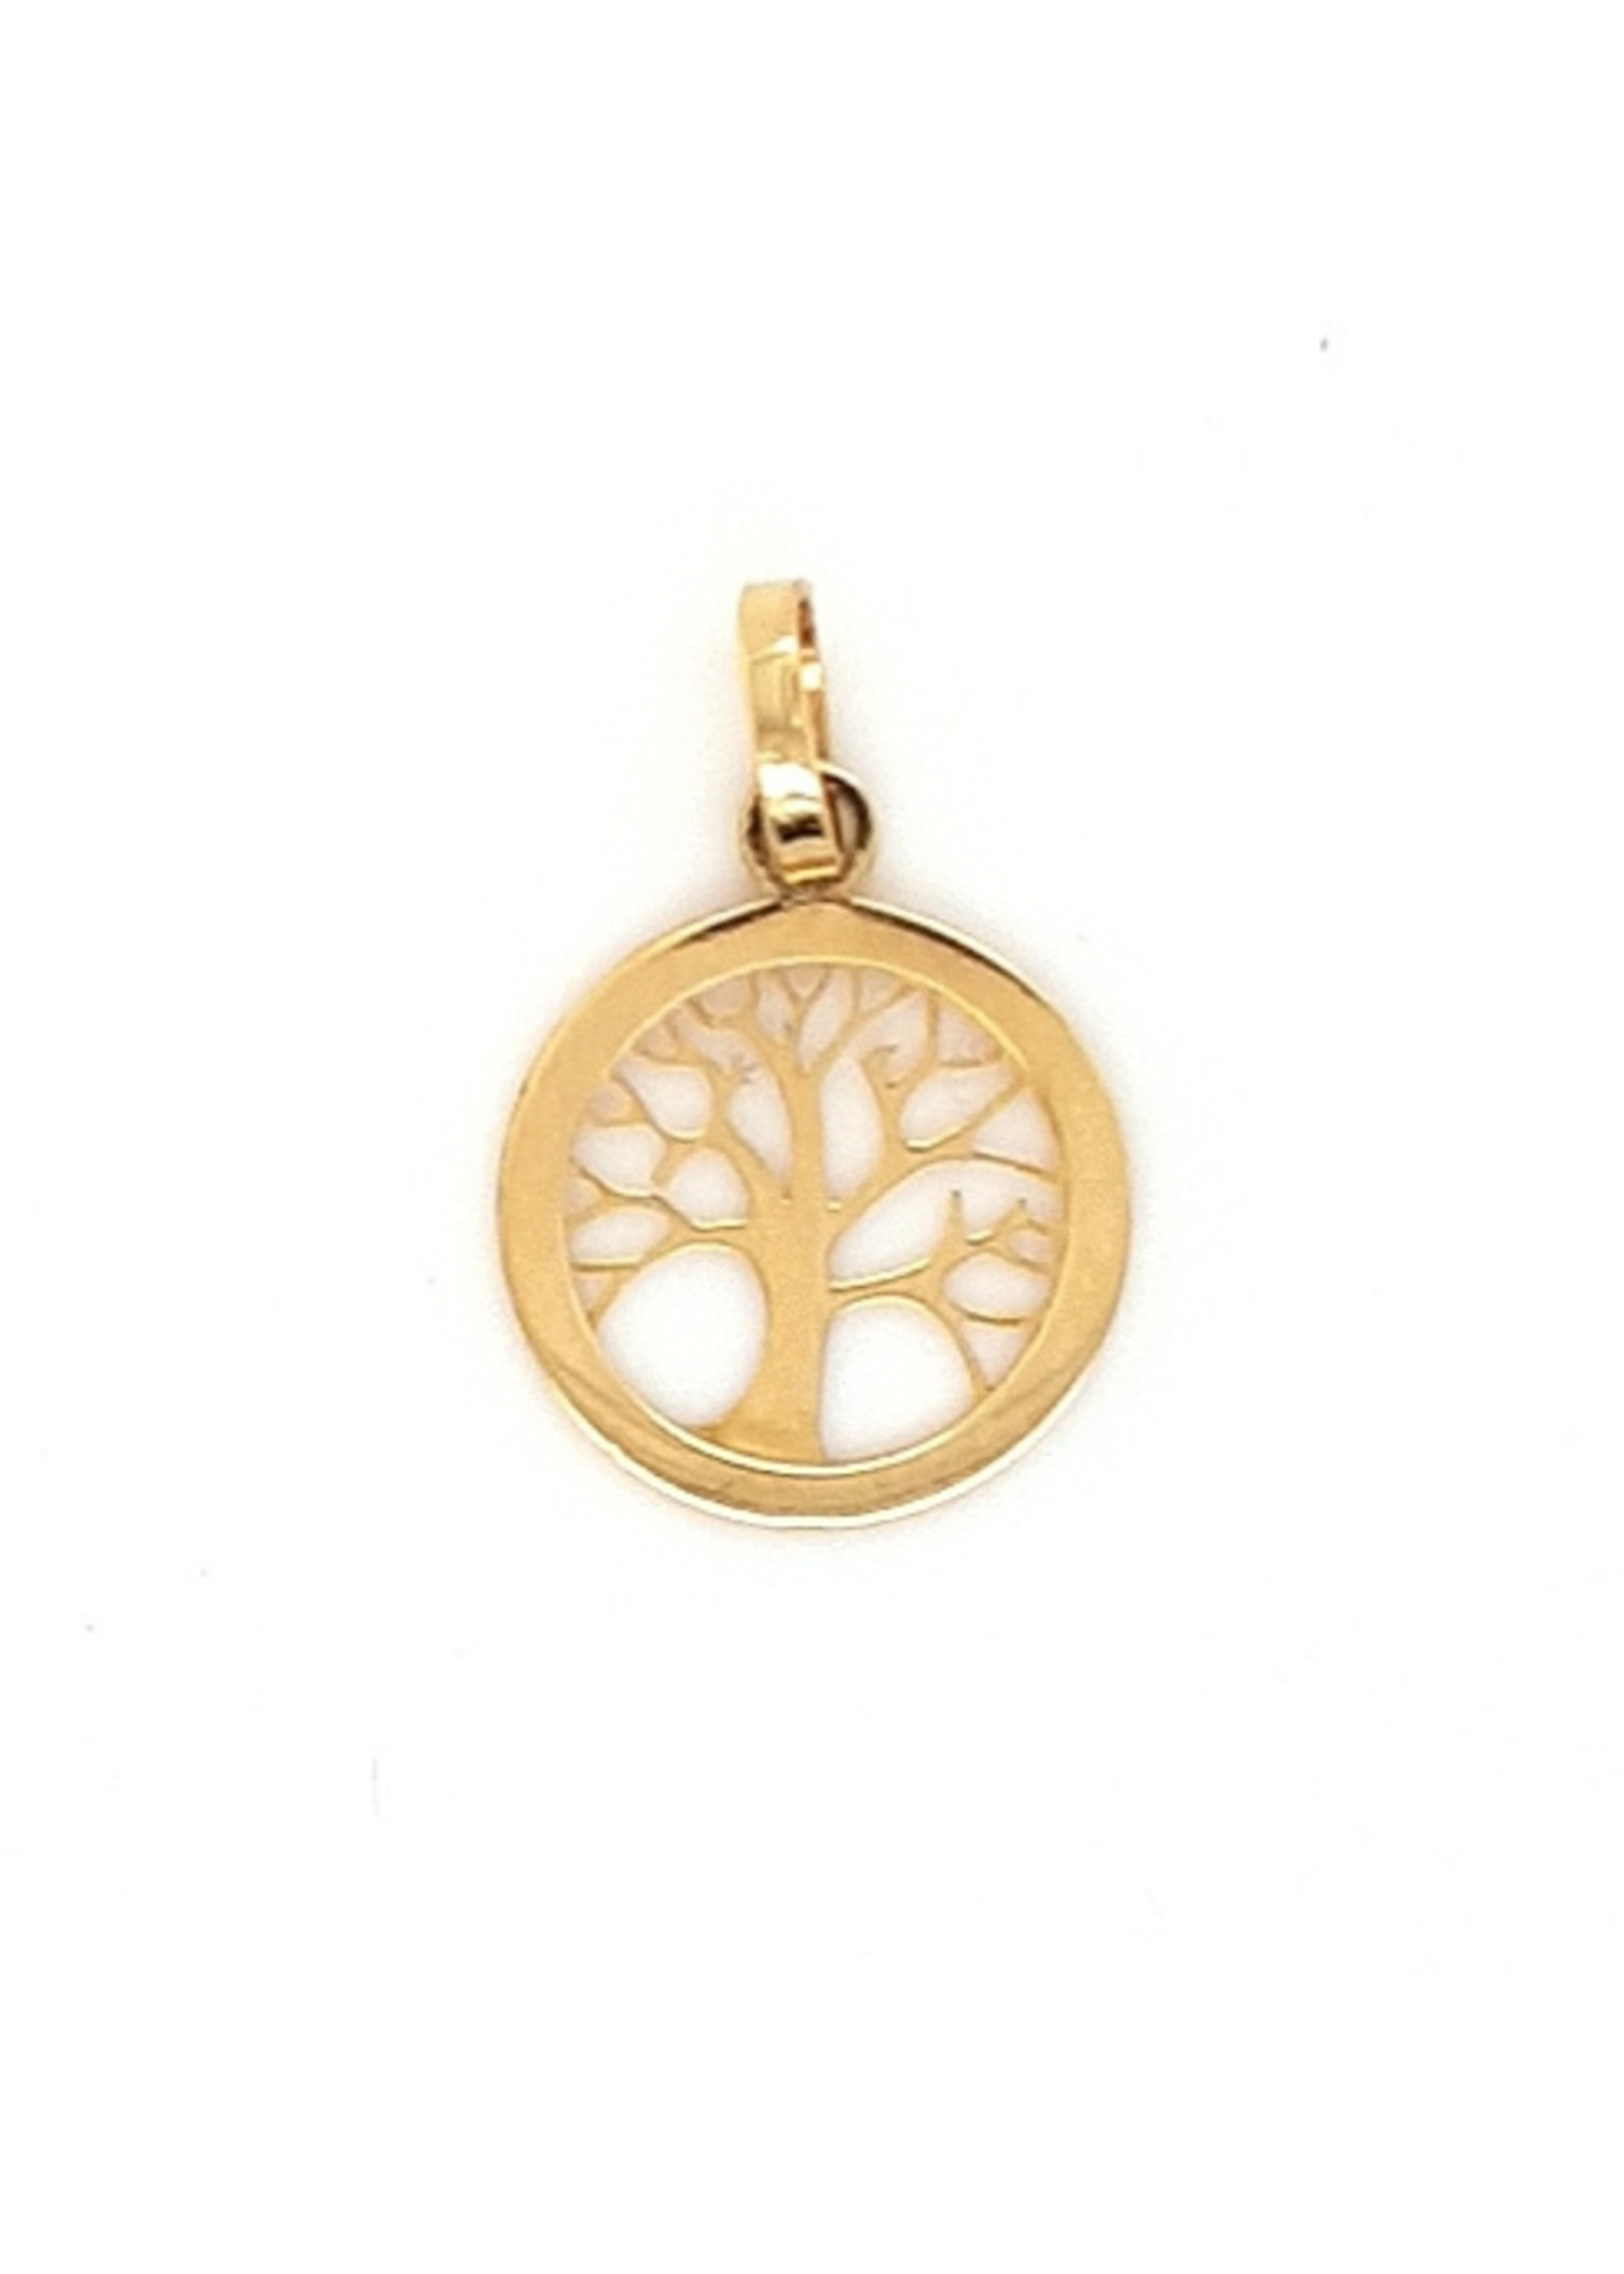 Vintage & Occasion Cataleya Pendant Tree of Life Gold